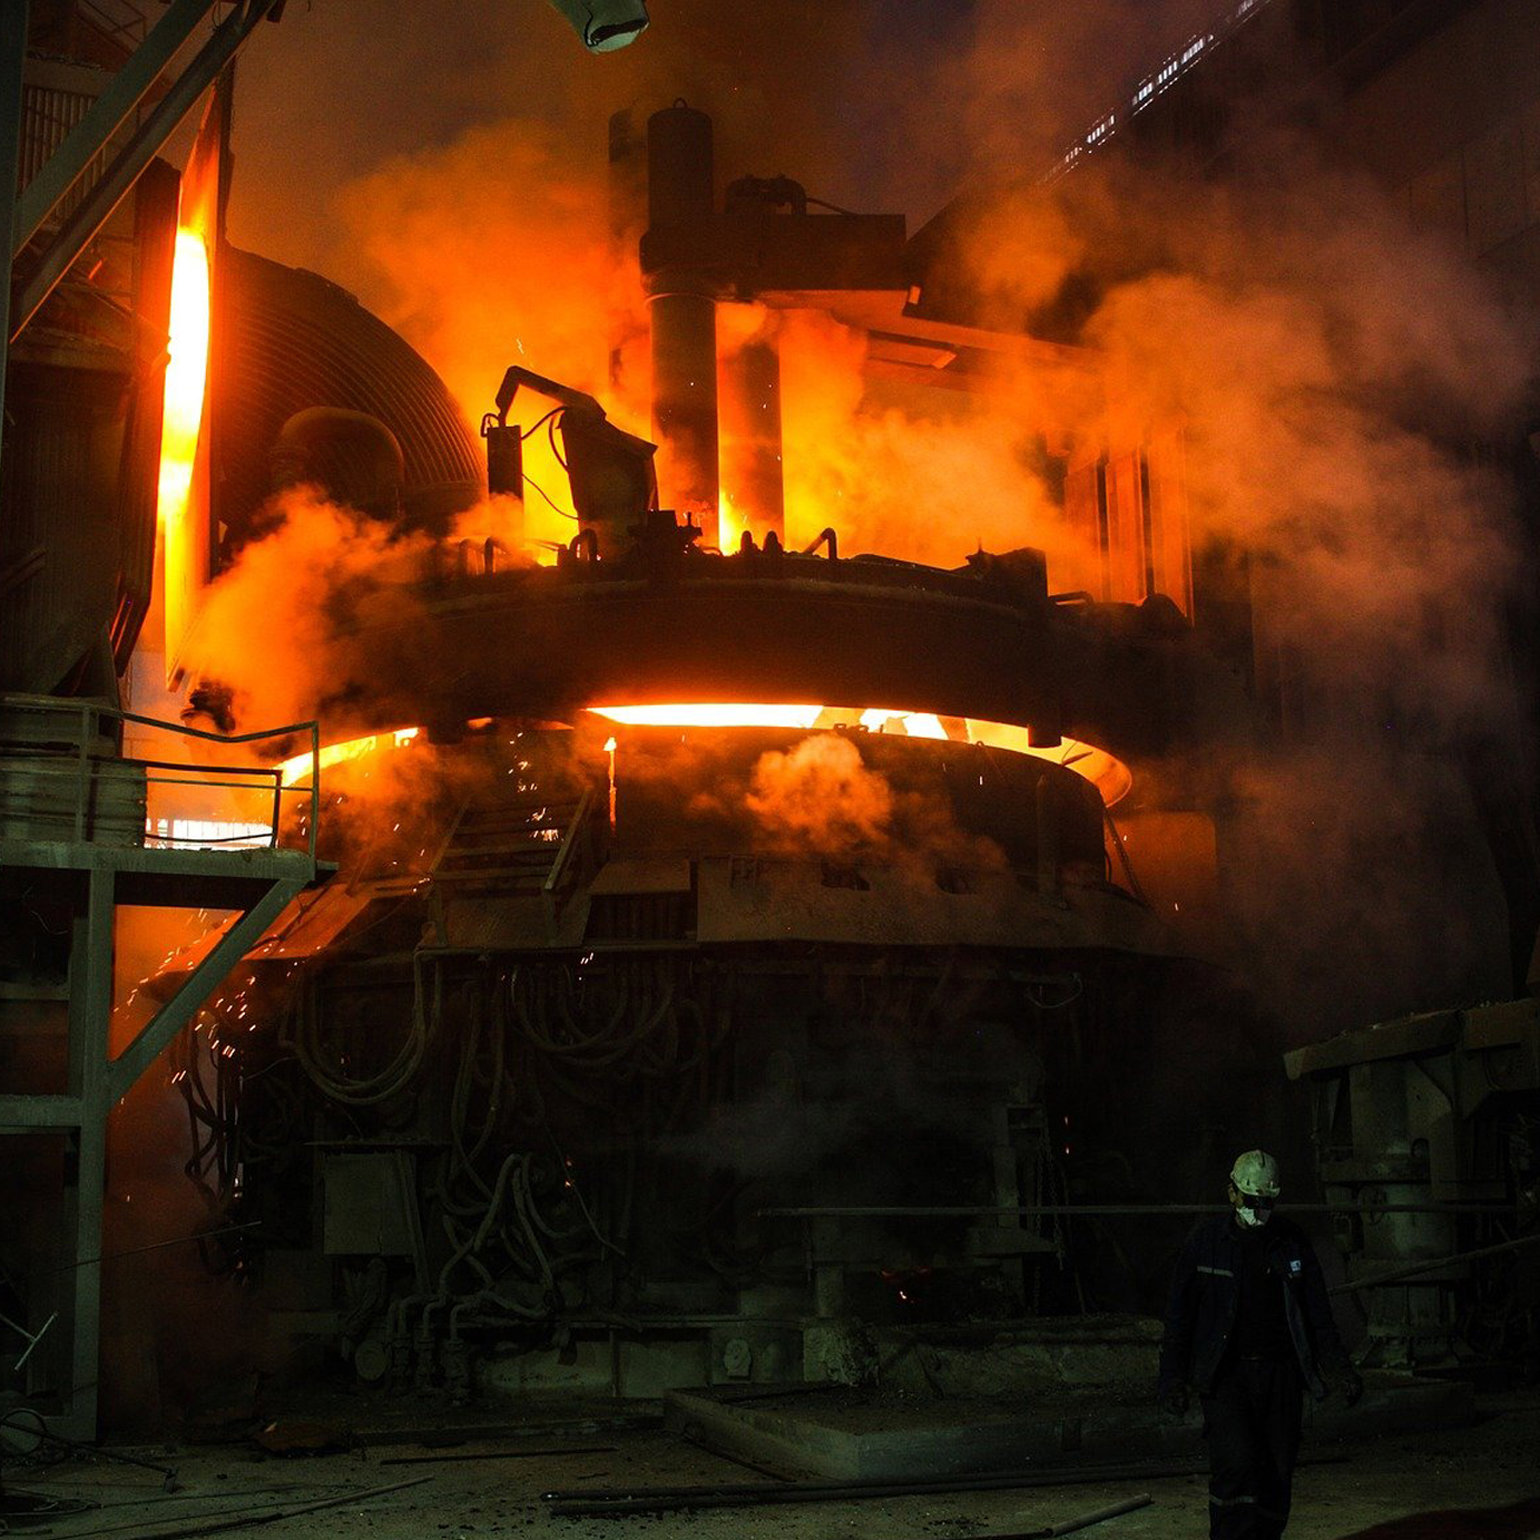 A blast furnace glowing orange with the extreme heat it is producing 